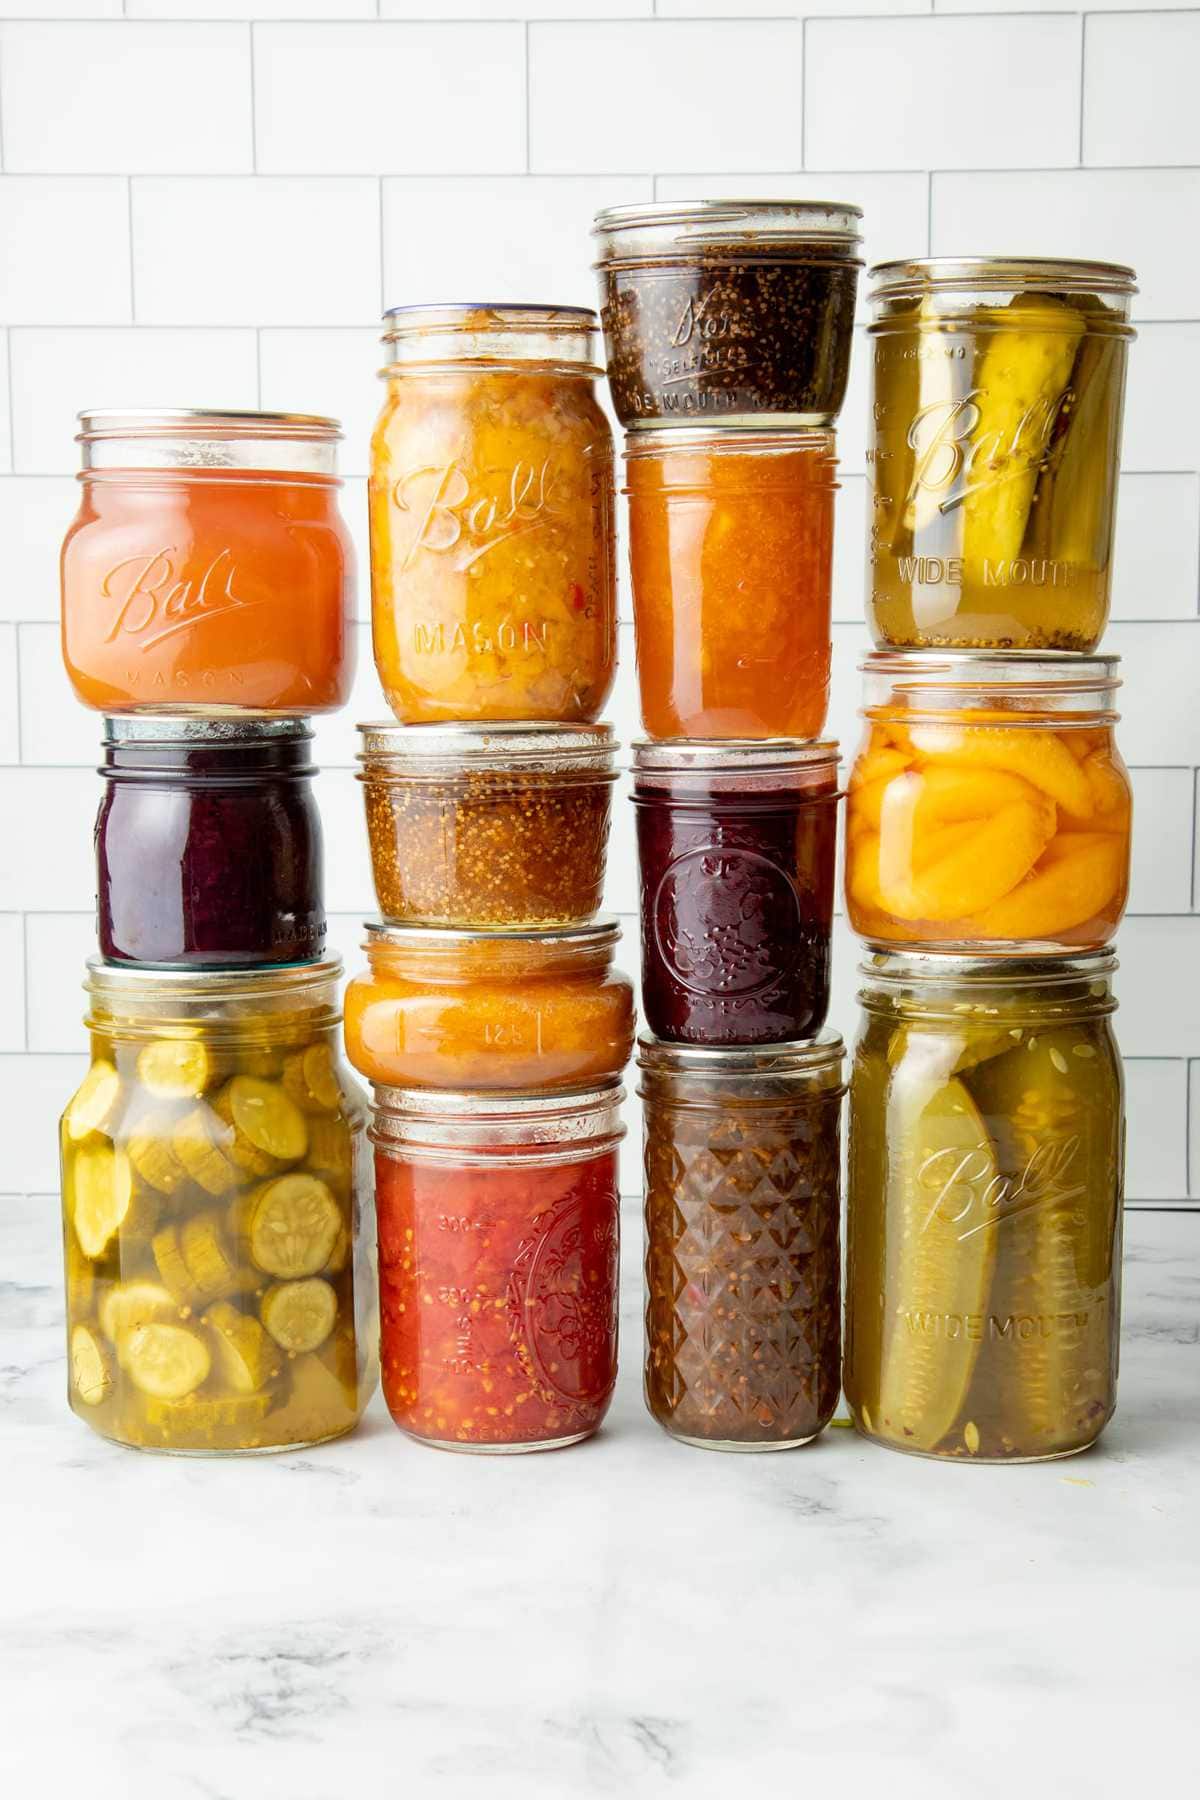 Water Bath Canning 101 (With Easy Canning Recipes)